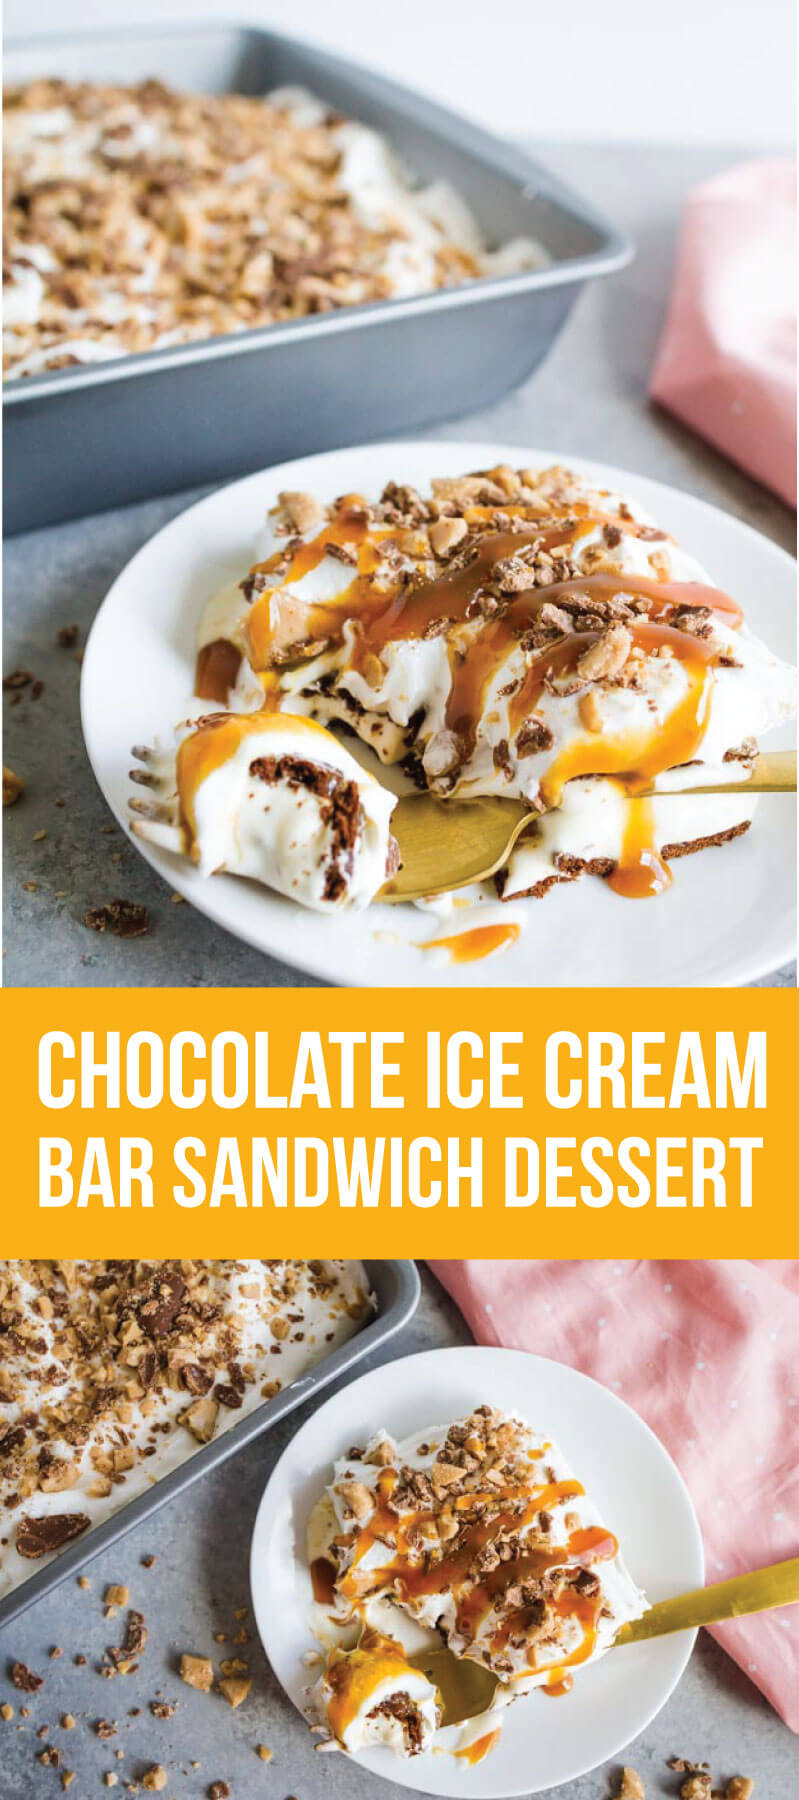 Food: Chocolate Ice Cream Bar Sandwich Dessert- this is an easy, peasy recipe that you can make for dessert and everyone will love! www.thirtyhandmadedays.com